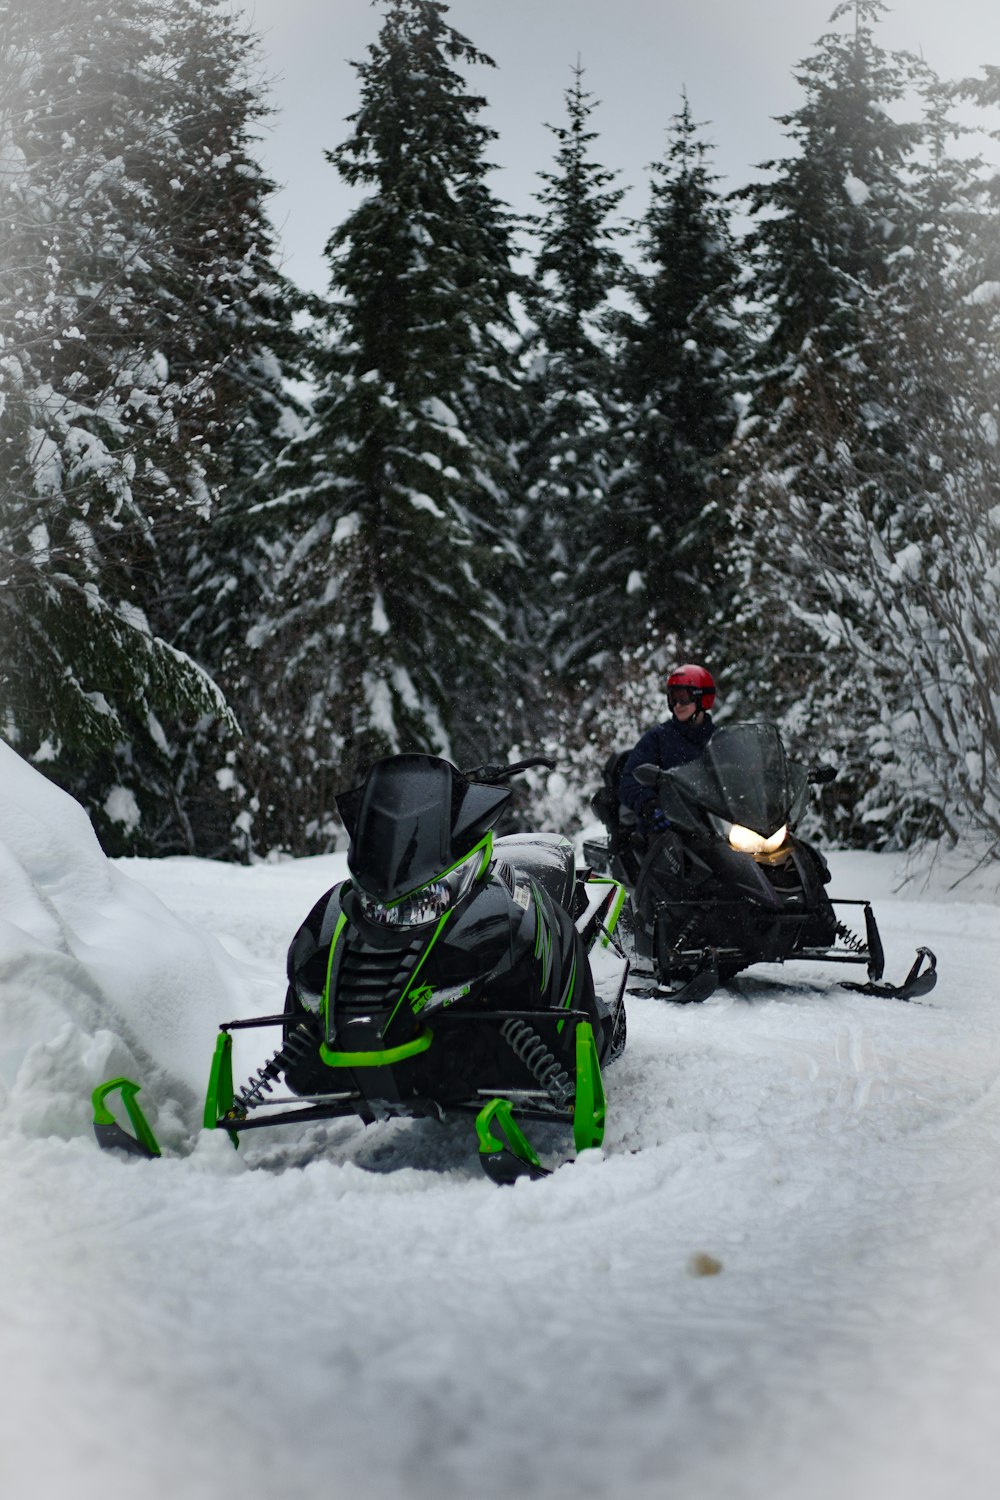 green and black snowmobile beside black snowmobile during daytime